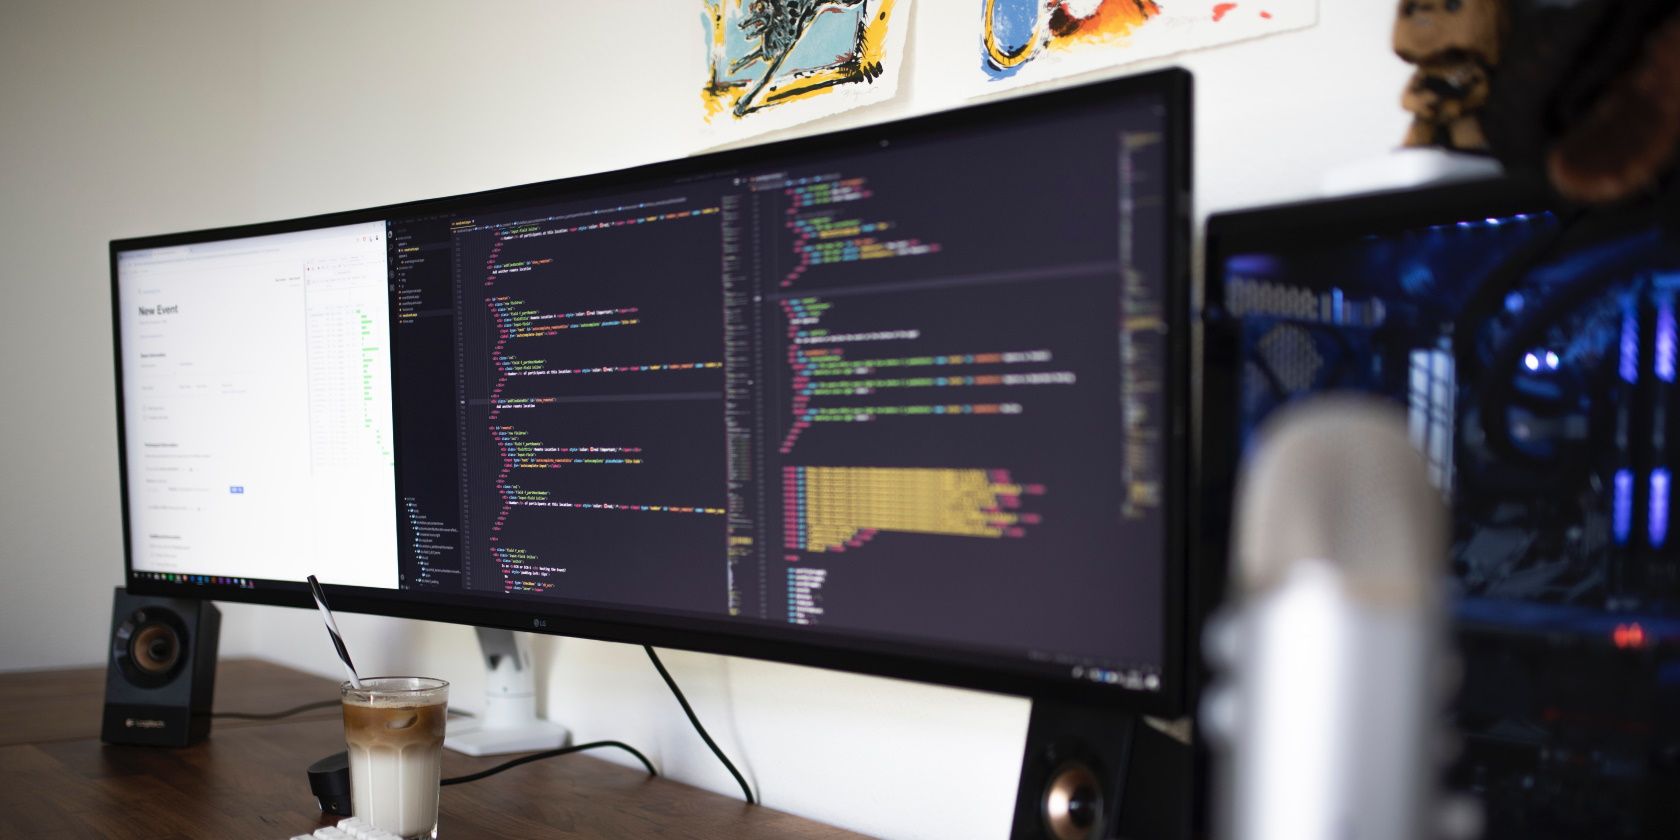 Programming on a large curved monitor